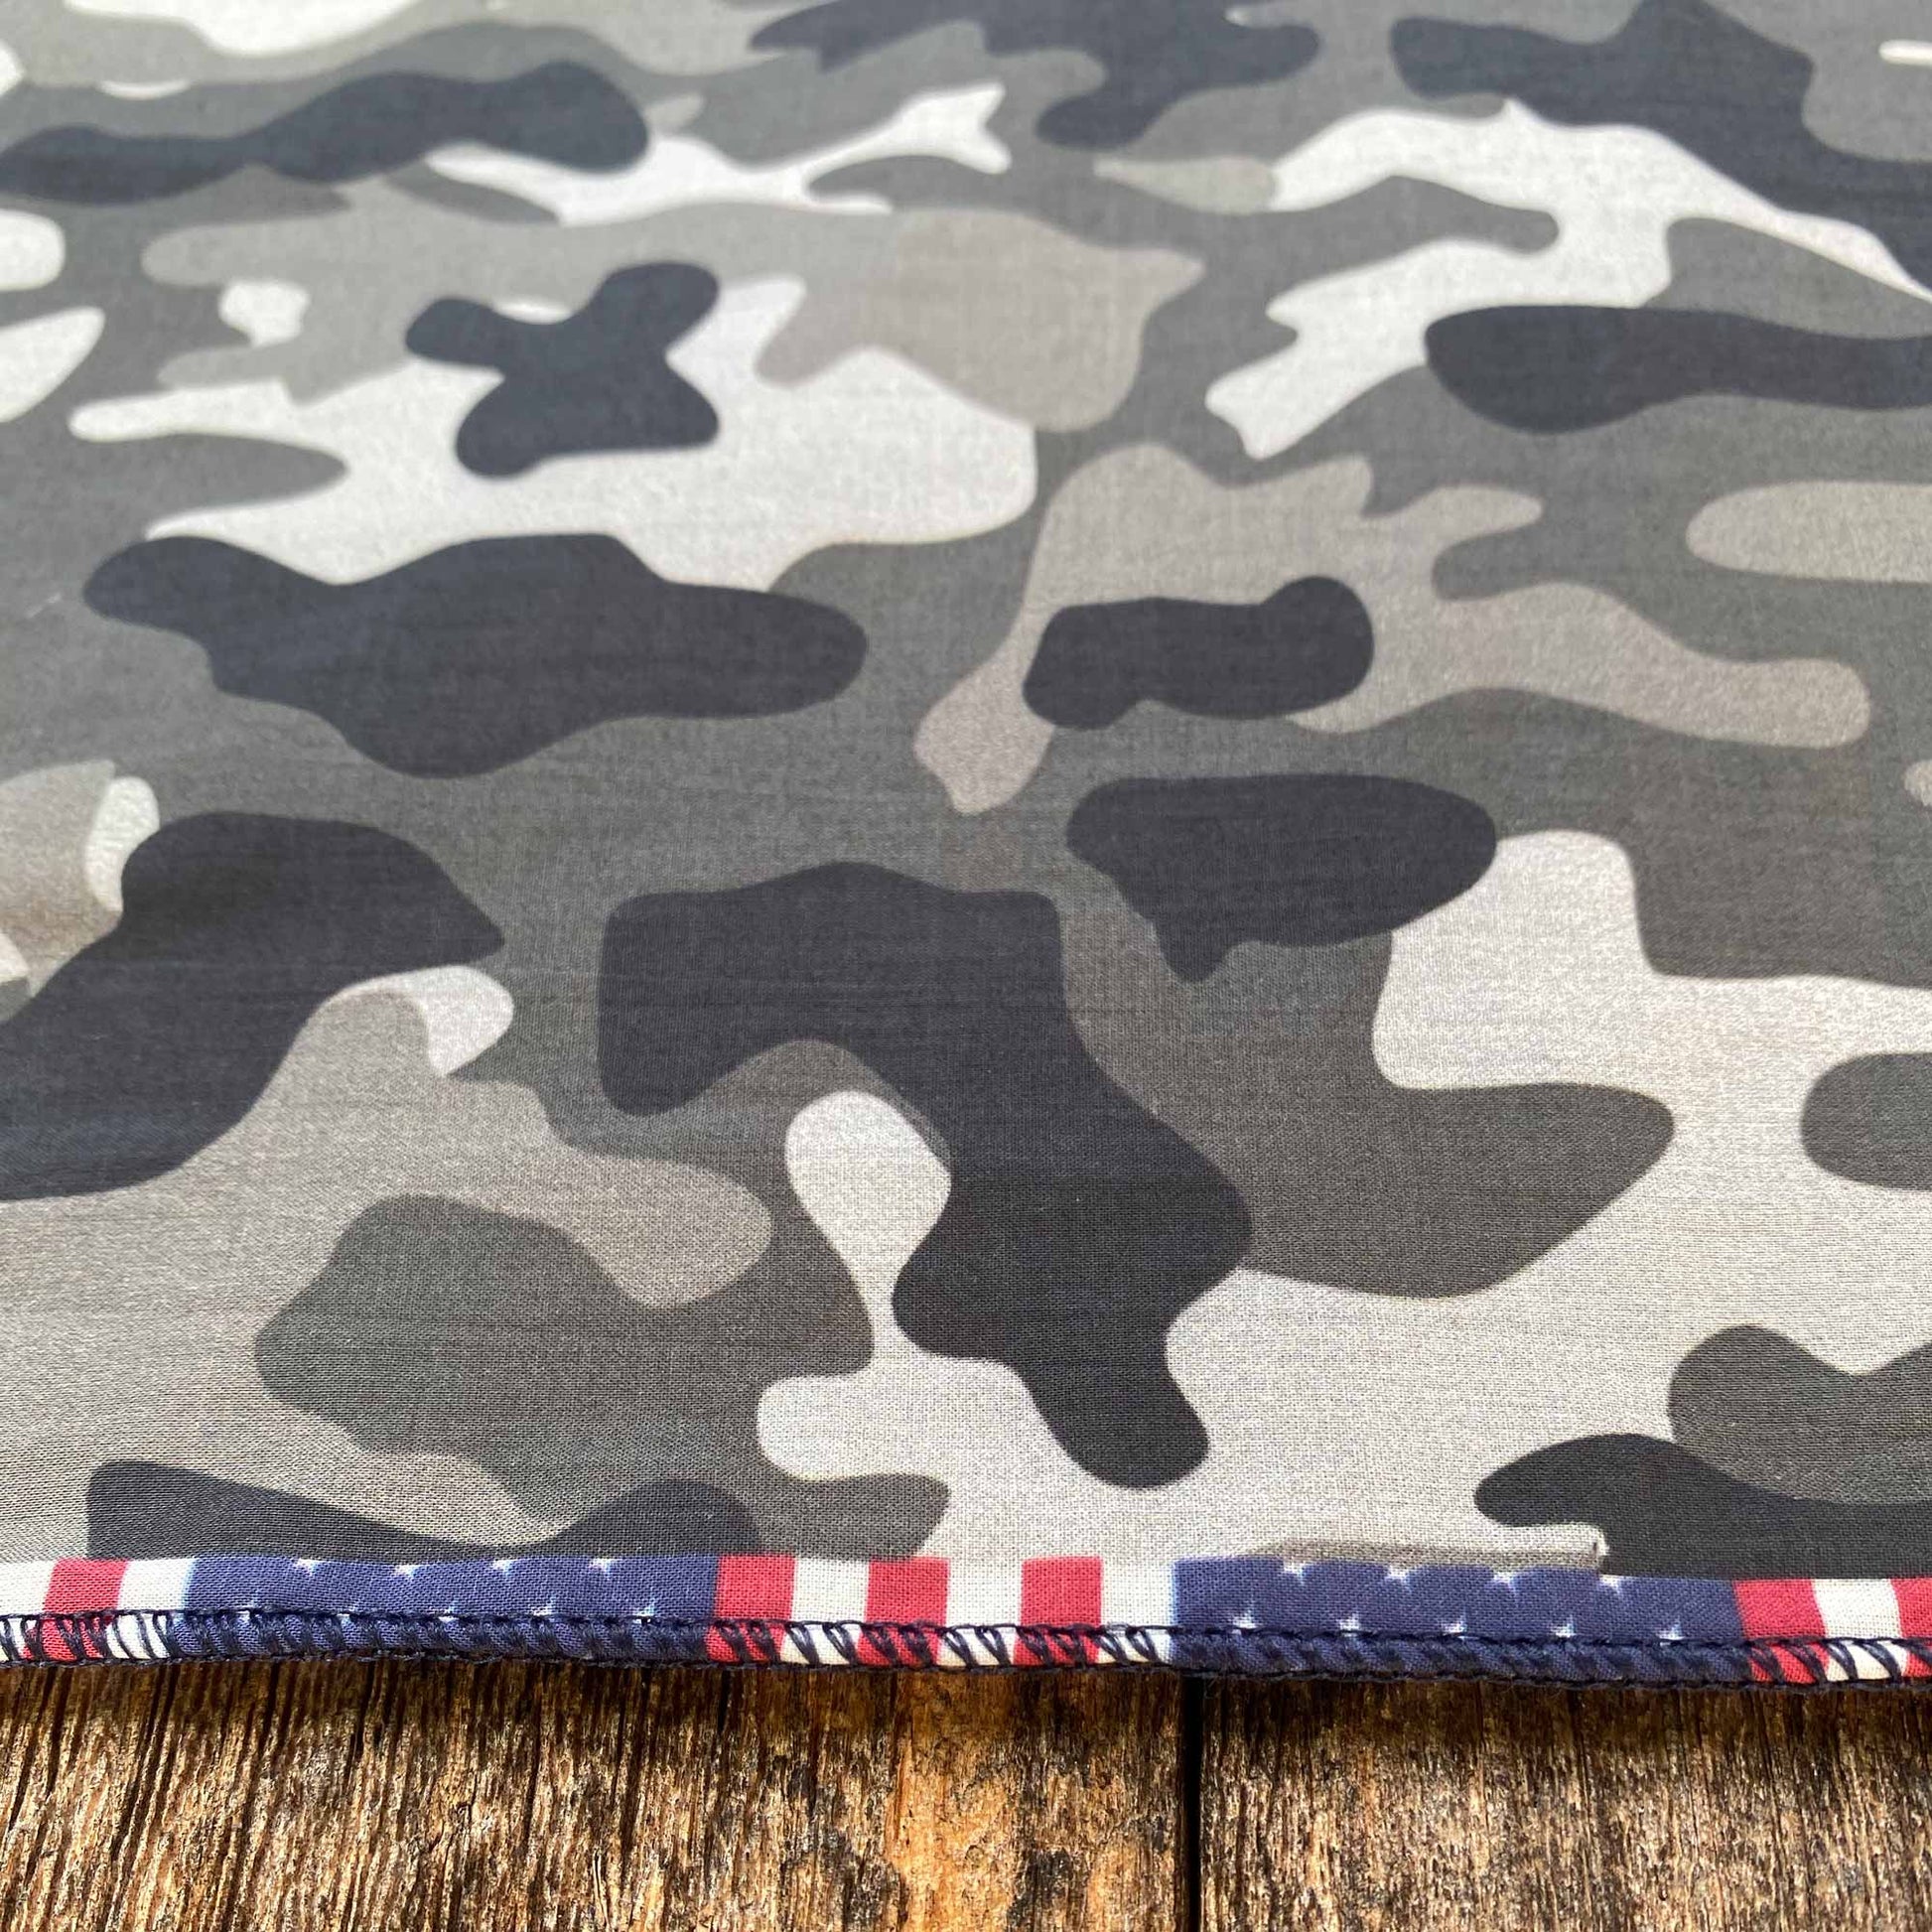 Concrete Camo grey camouflage bandana. Every day is the Fourth of July. Made in the USA 🇺🇸 